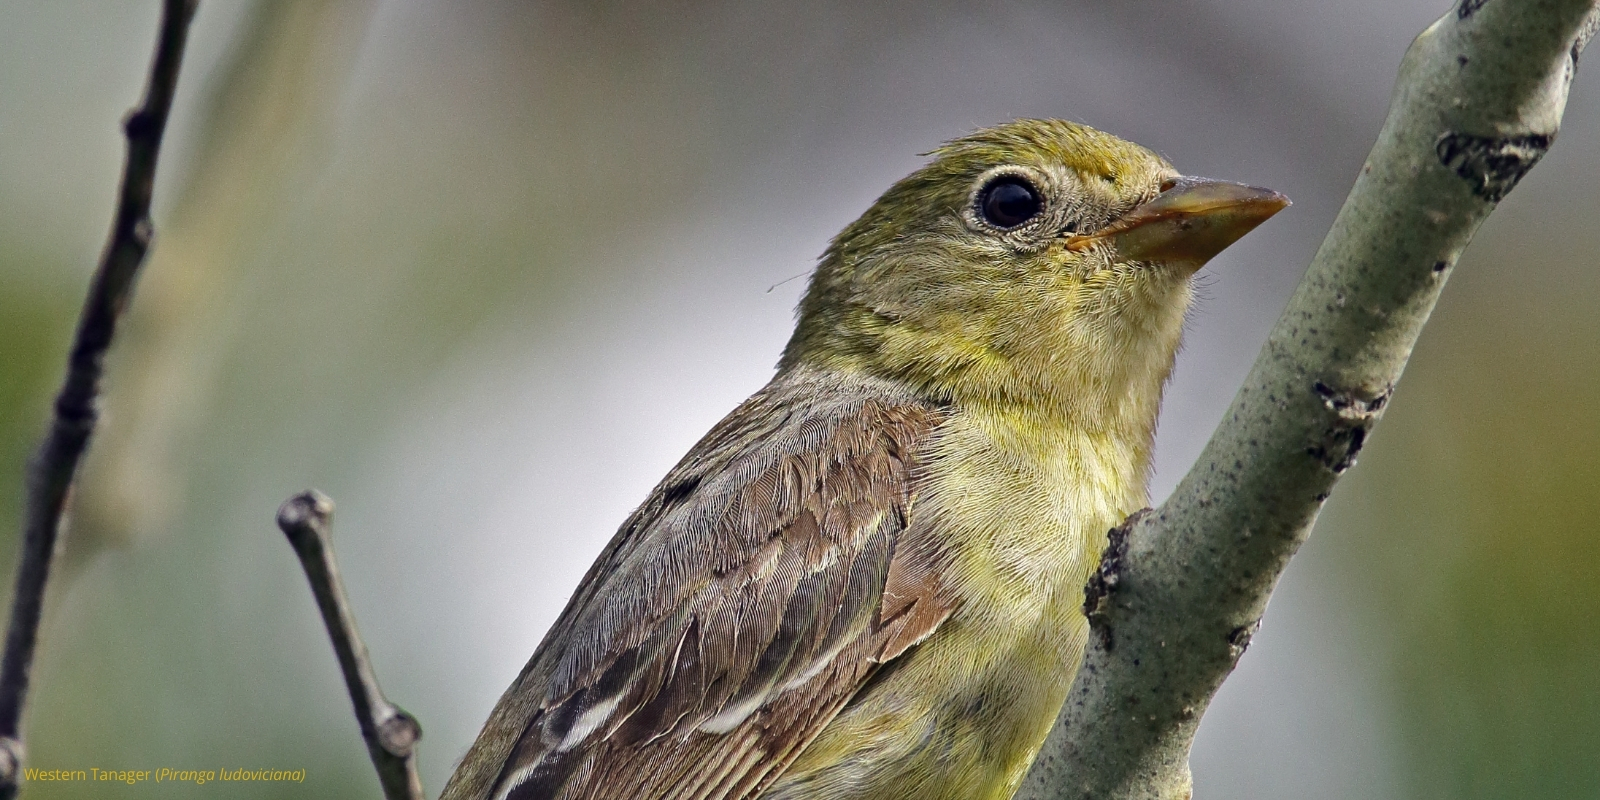 A female Western Tanager (Piranga ludoviciana) sits among branches.